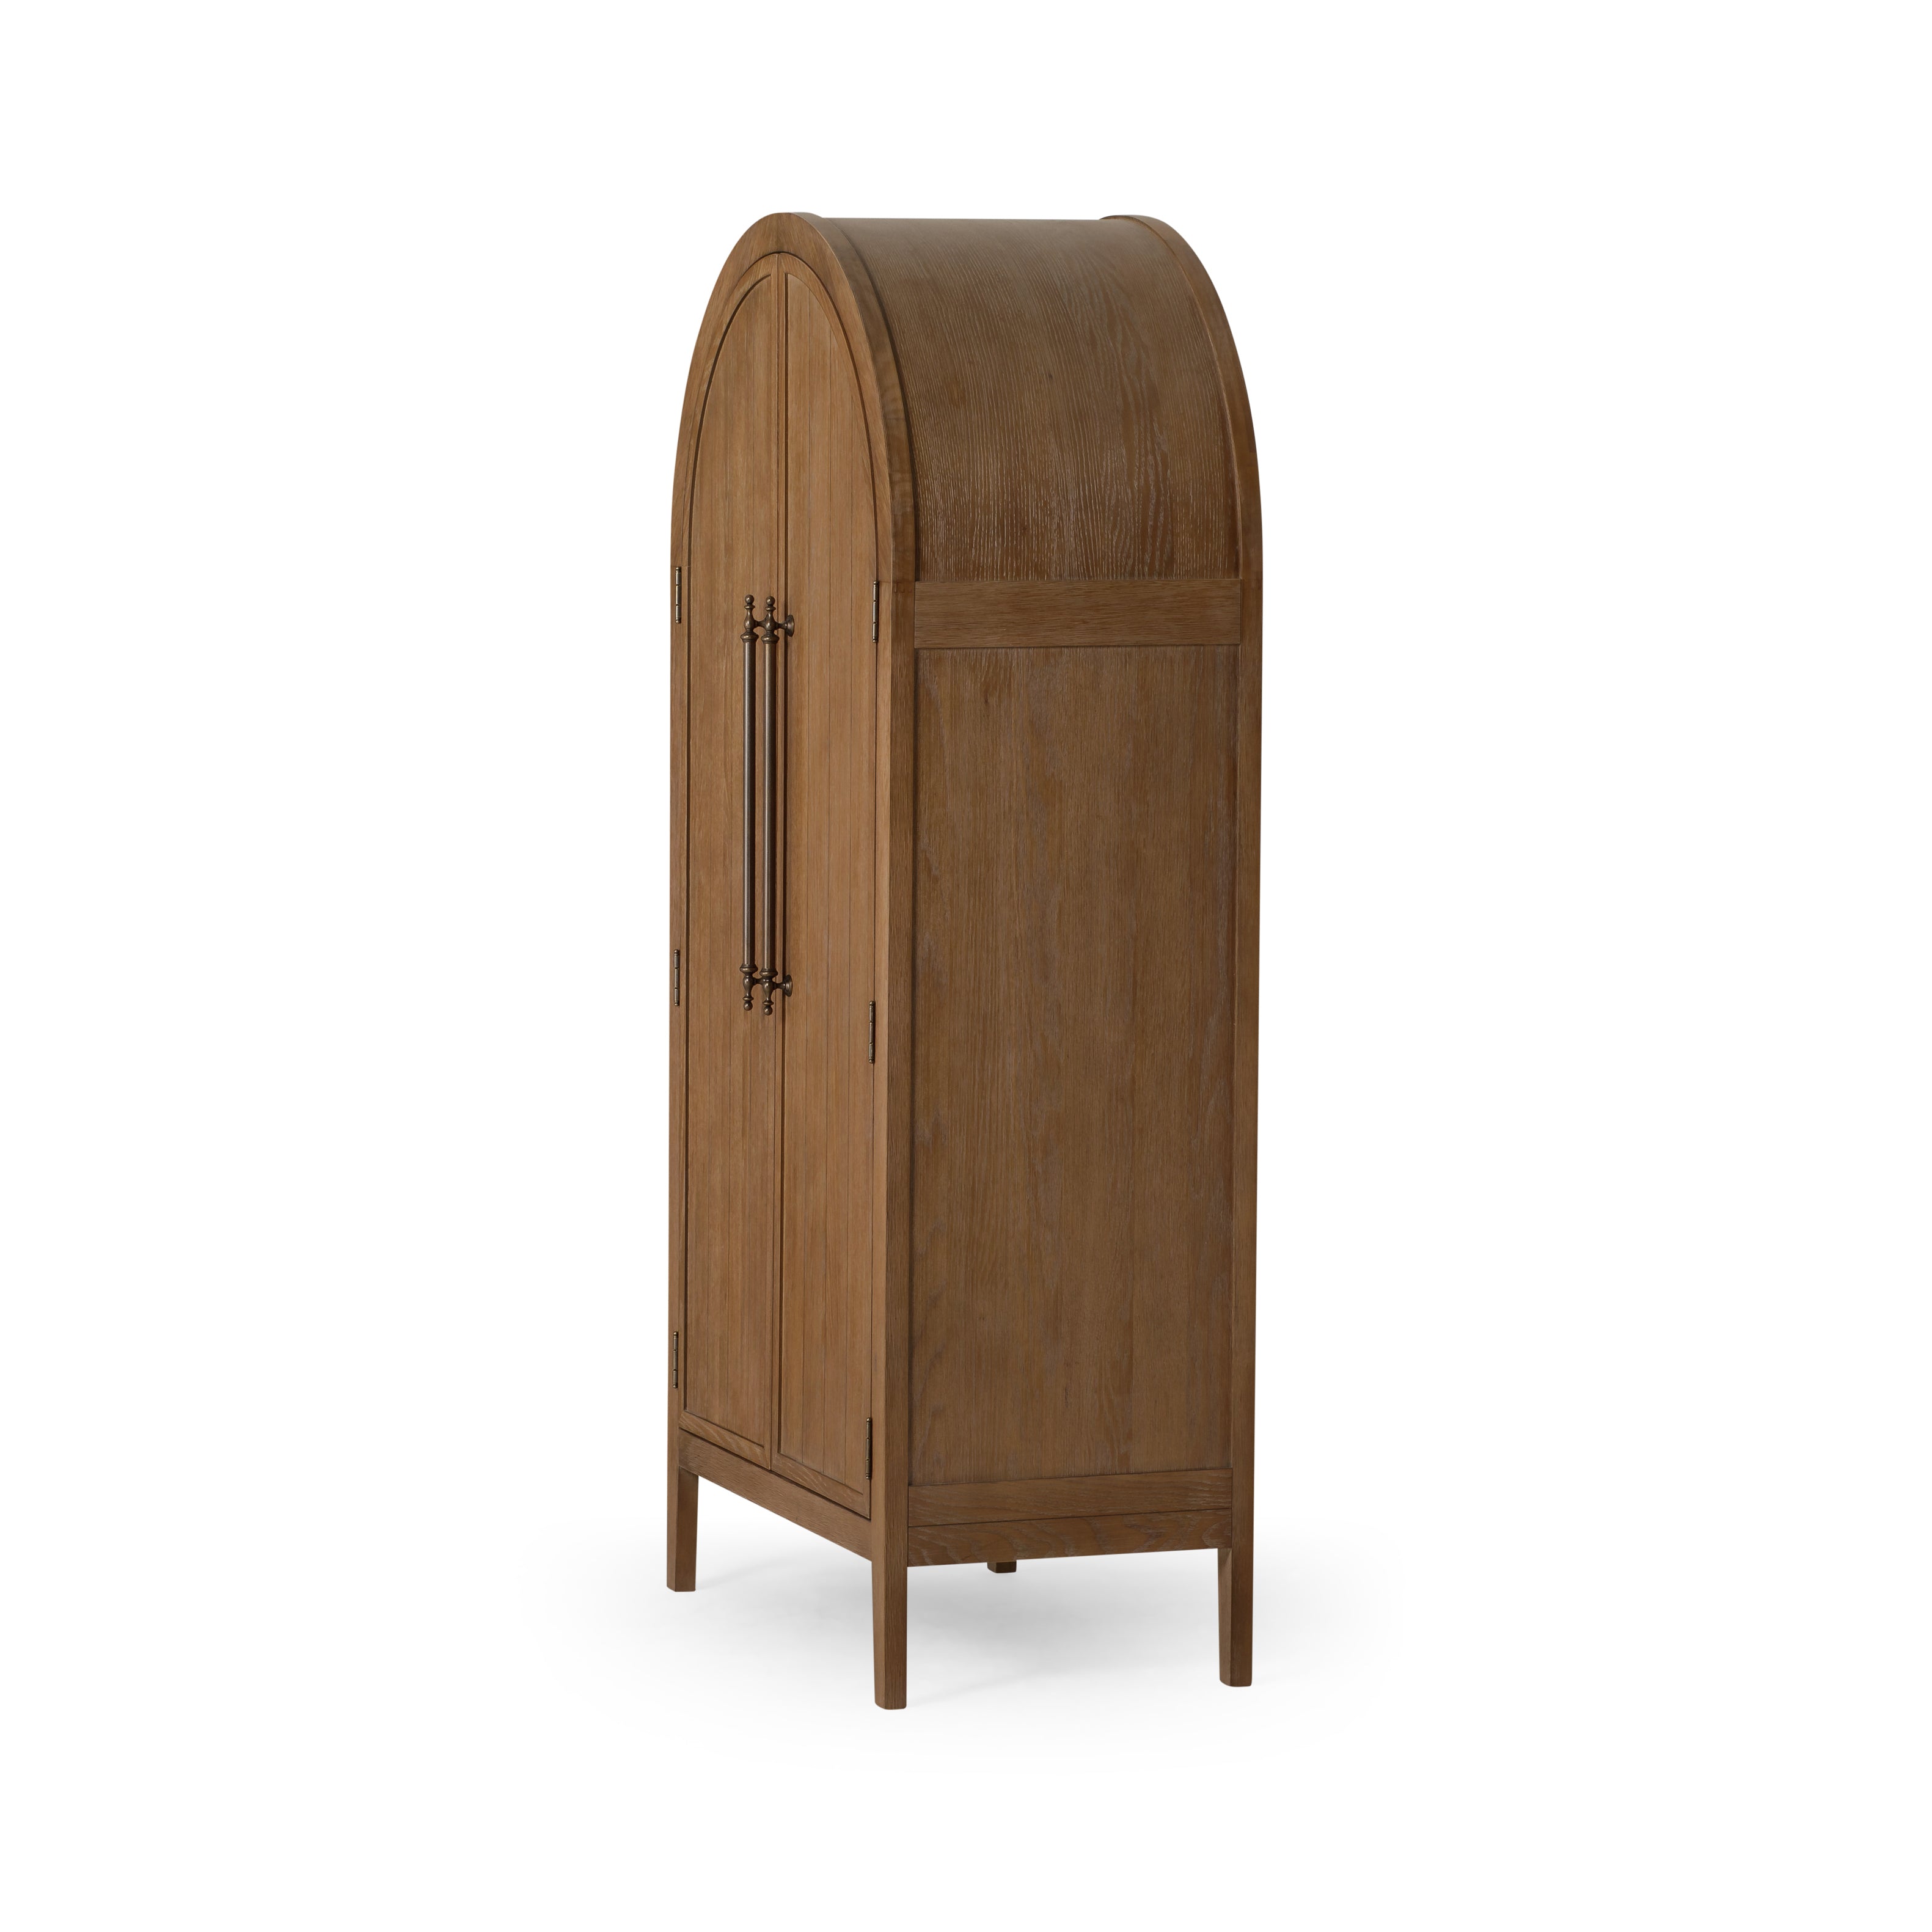 Selene Classical Wooden Cabinet in Antiqued Natural Finish in Cabinets by Maven Lane